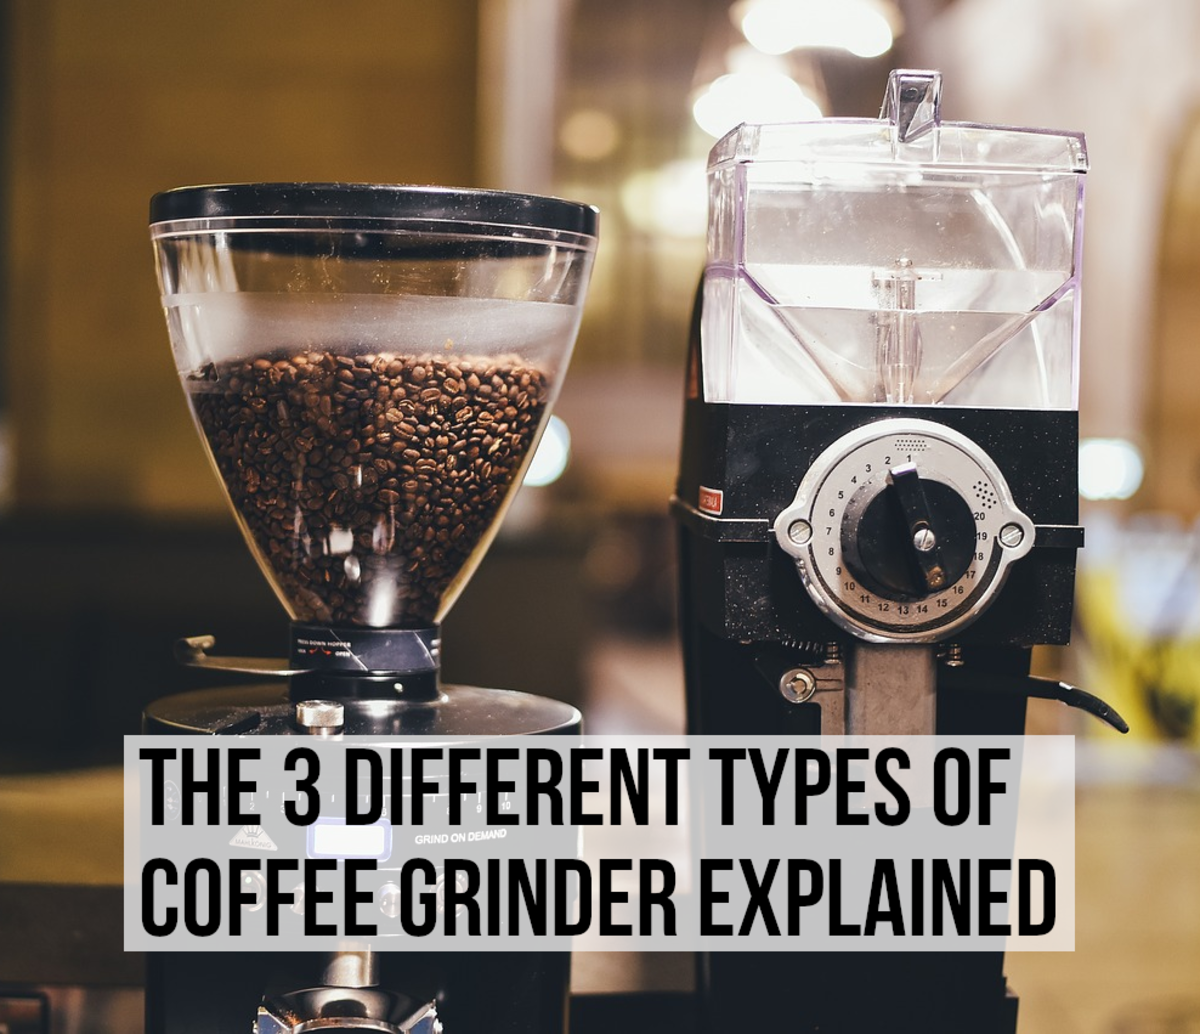 This article explains the different types of coffee grinders and gives examples.